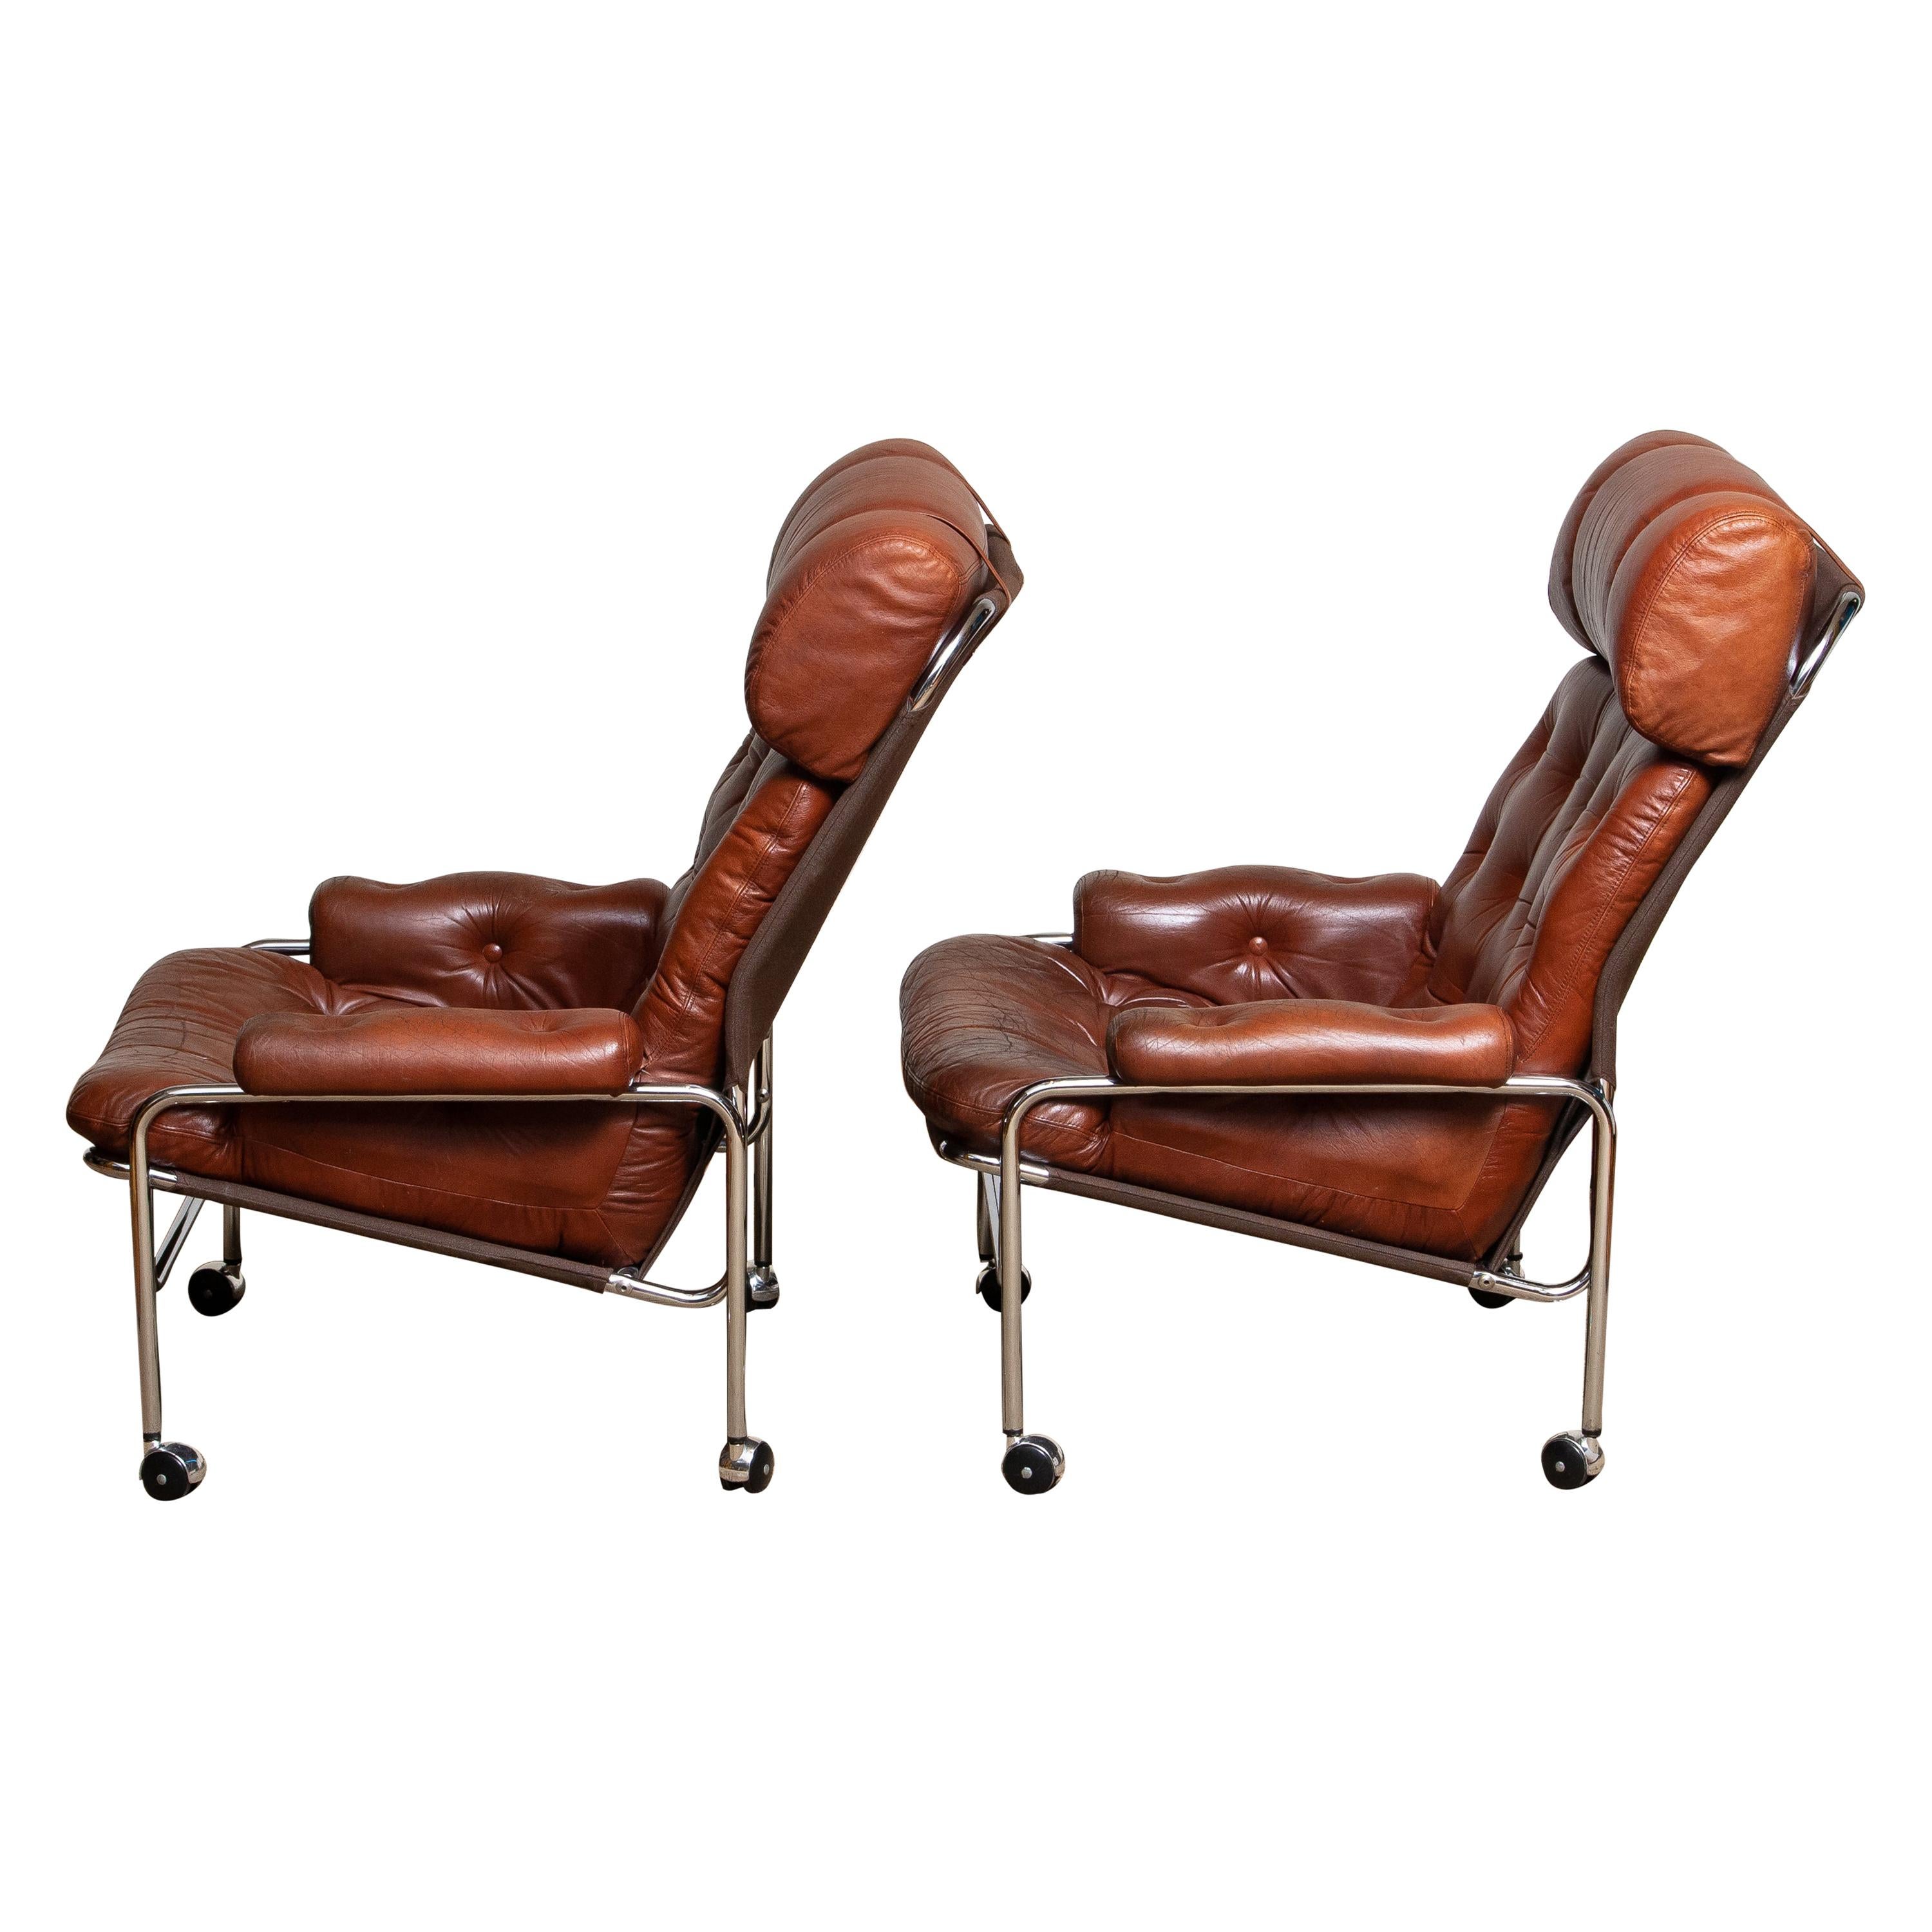 Beautiful set of two lounge / easy chair in aged brown / cognac leather and chrome designed by Pethrus Lindlöfs for A.B. Lindlöfs Möbler Lammhult, Sweden.
The aged leather on both chairs gives them there typical vintage character. The leather is